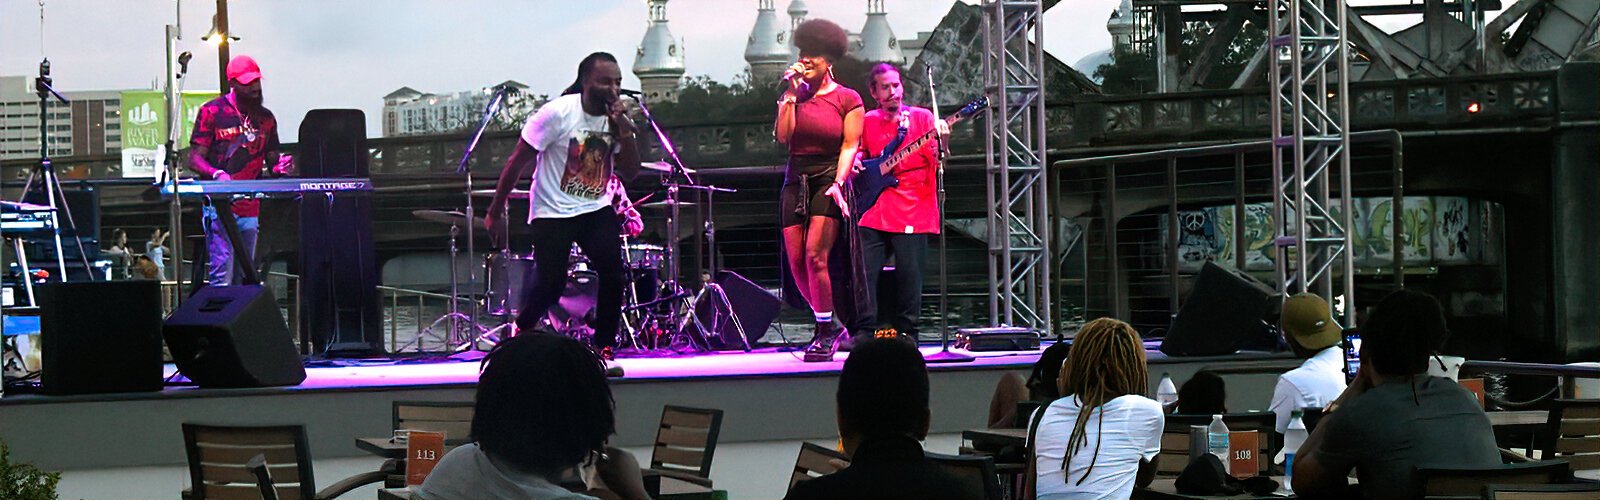 Singer artist and emcee/producer Jinx, a Tampa native, performs with his wife Shelby Sol and their band, on the Straz Center’s Riverwalk stage during a free outdoor concert for Fourth Friday.